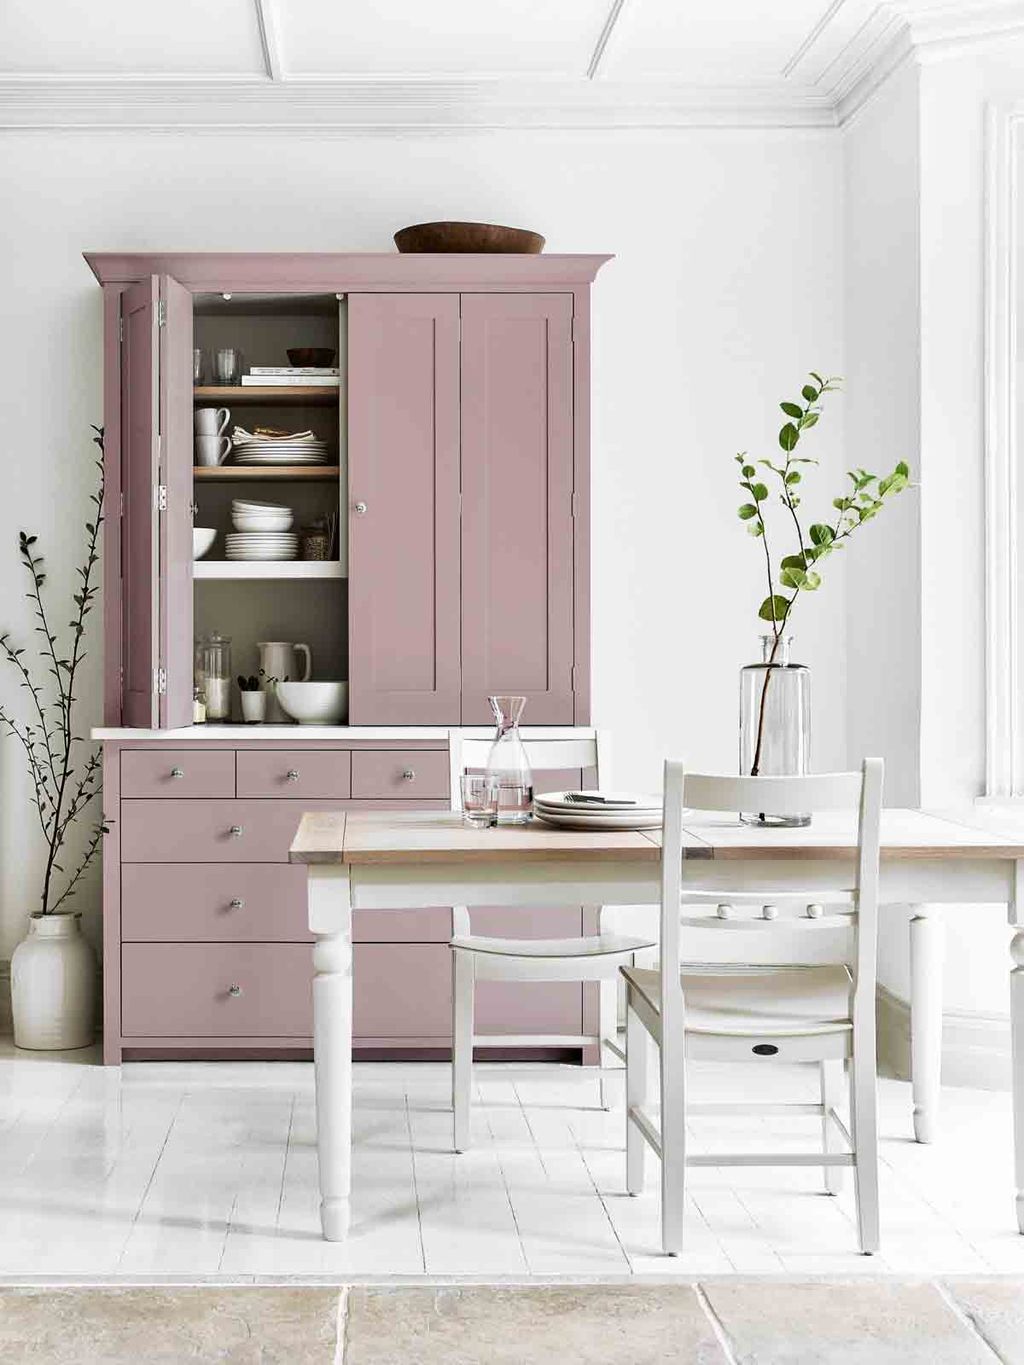 New Collections For 2018/2019: Modern Storage Gets A Cool New Look